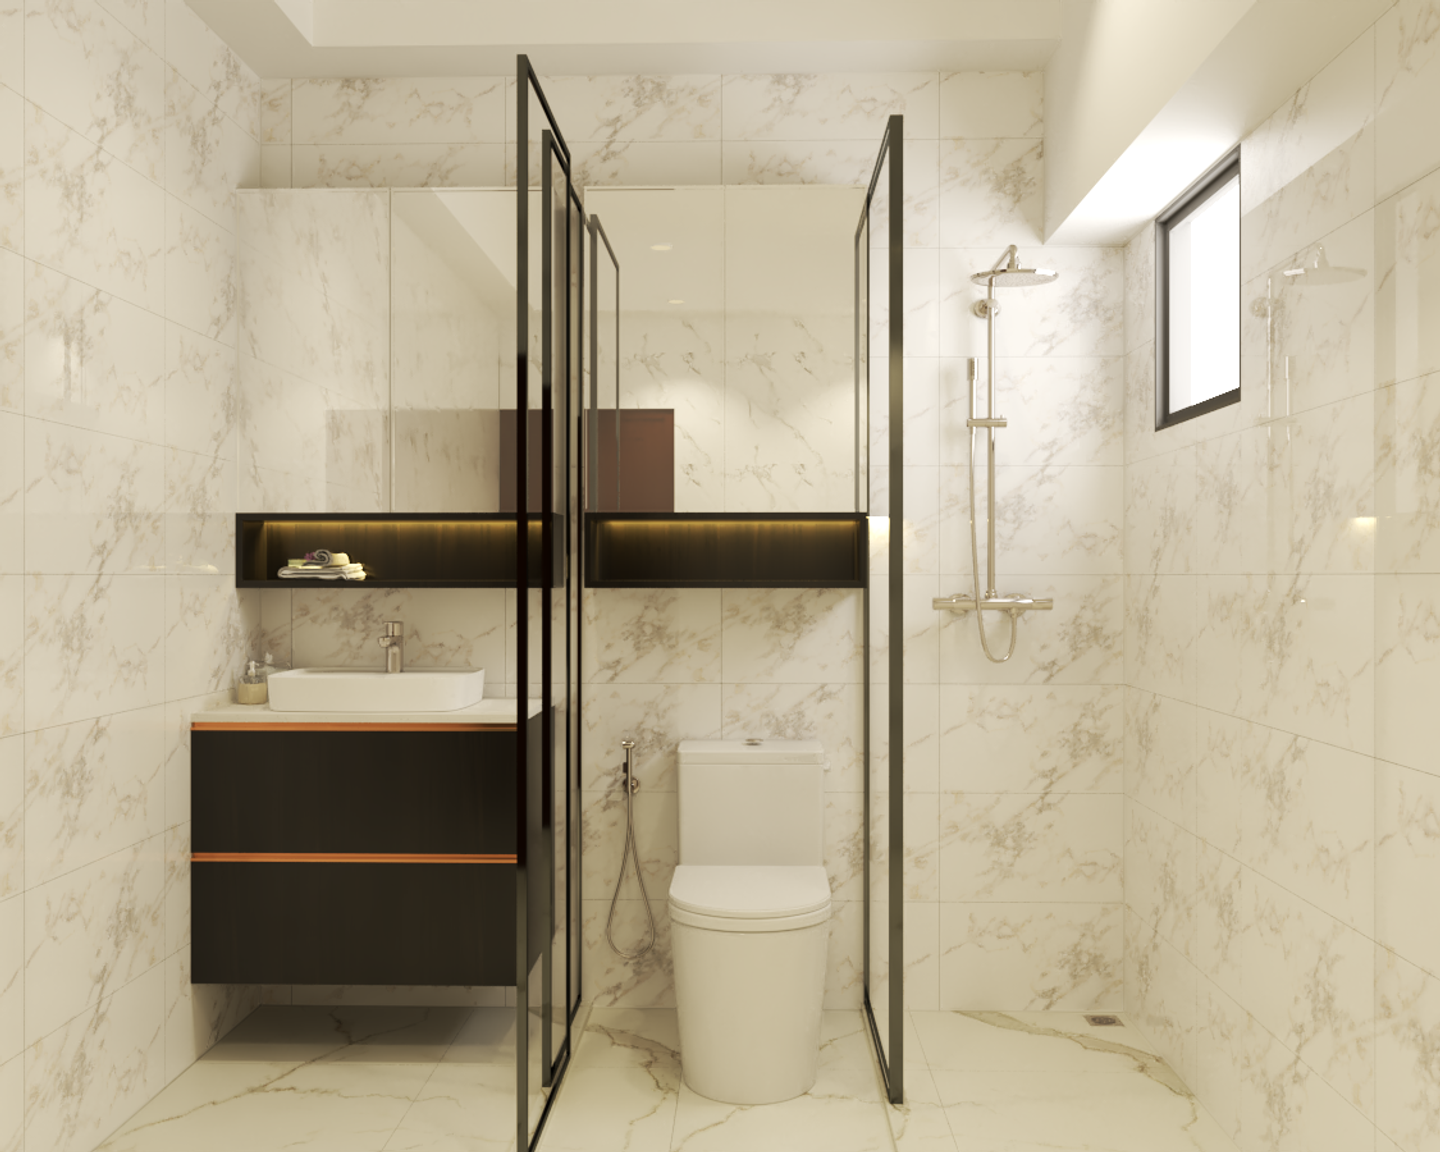 Modern Compact Toilet Interior Design with Separators and Wooden Storage - Livspace